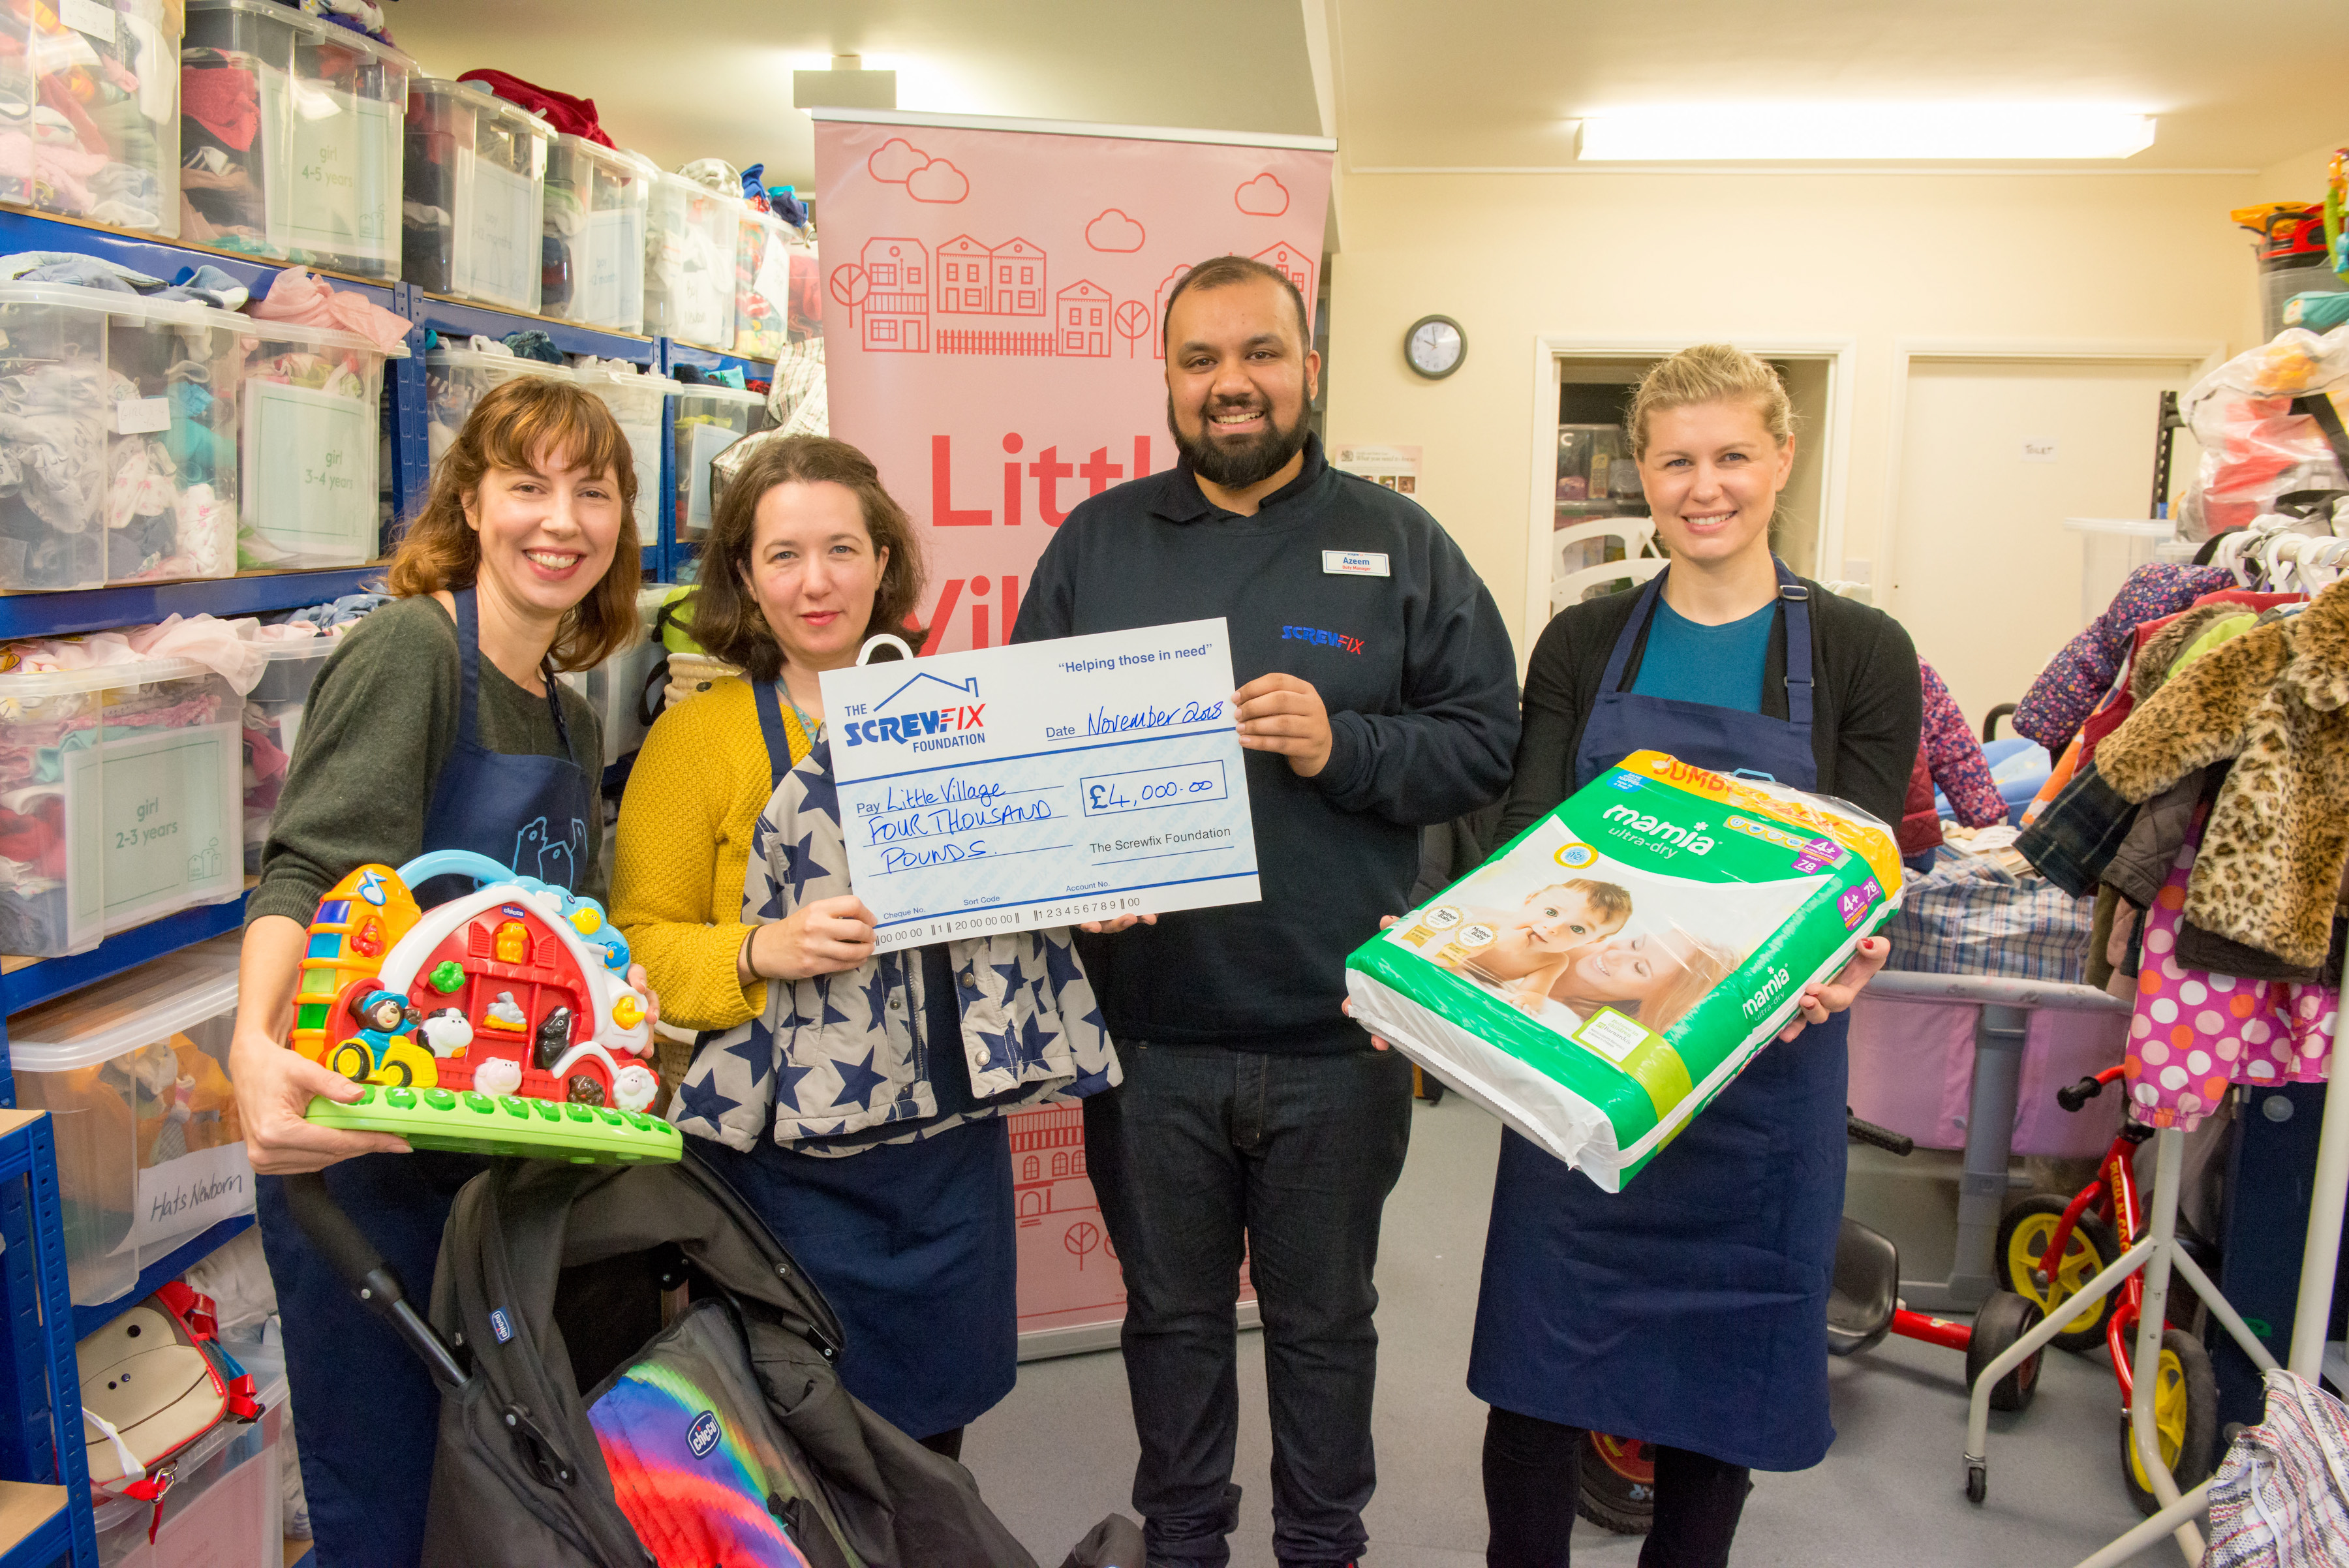 The Screwfix Foundation supports Little Village in Southwark, London